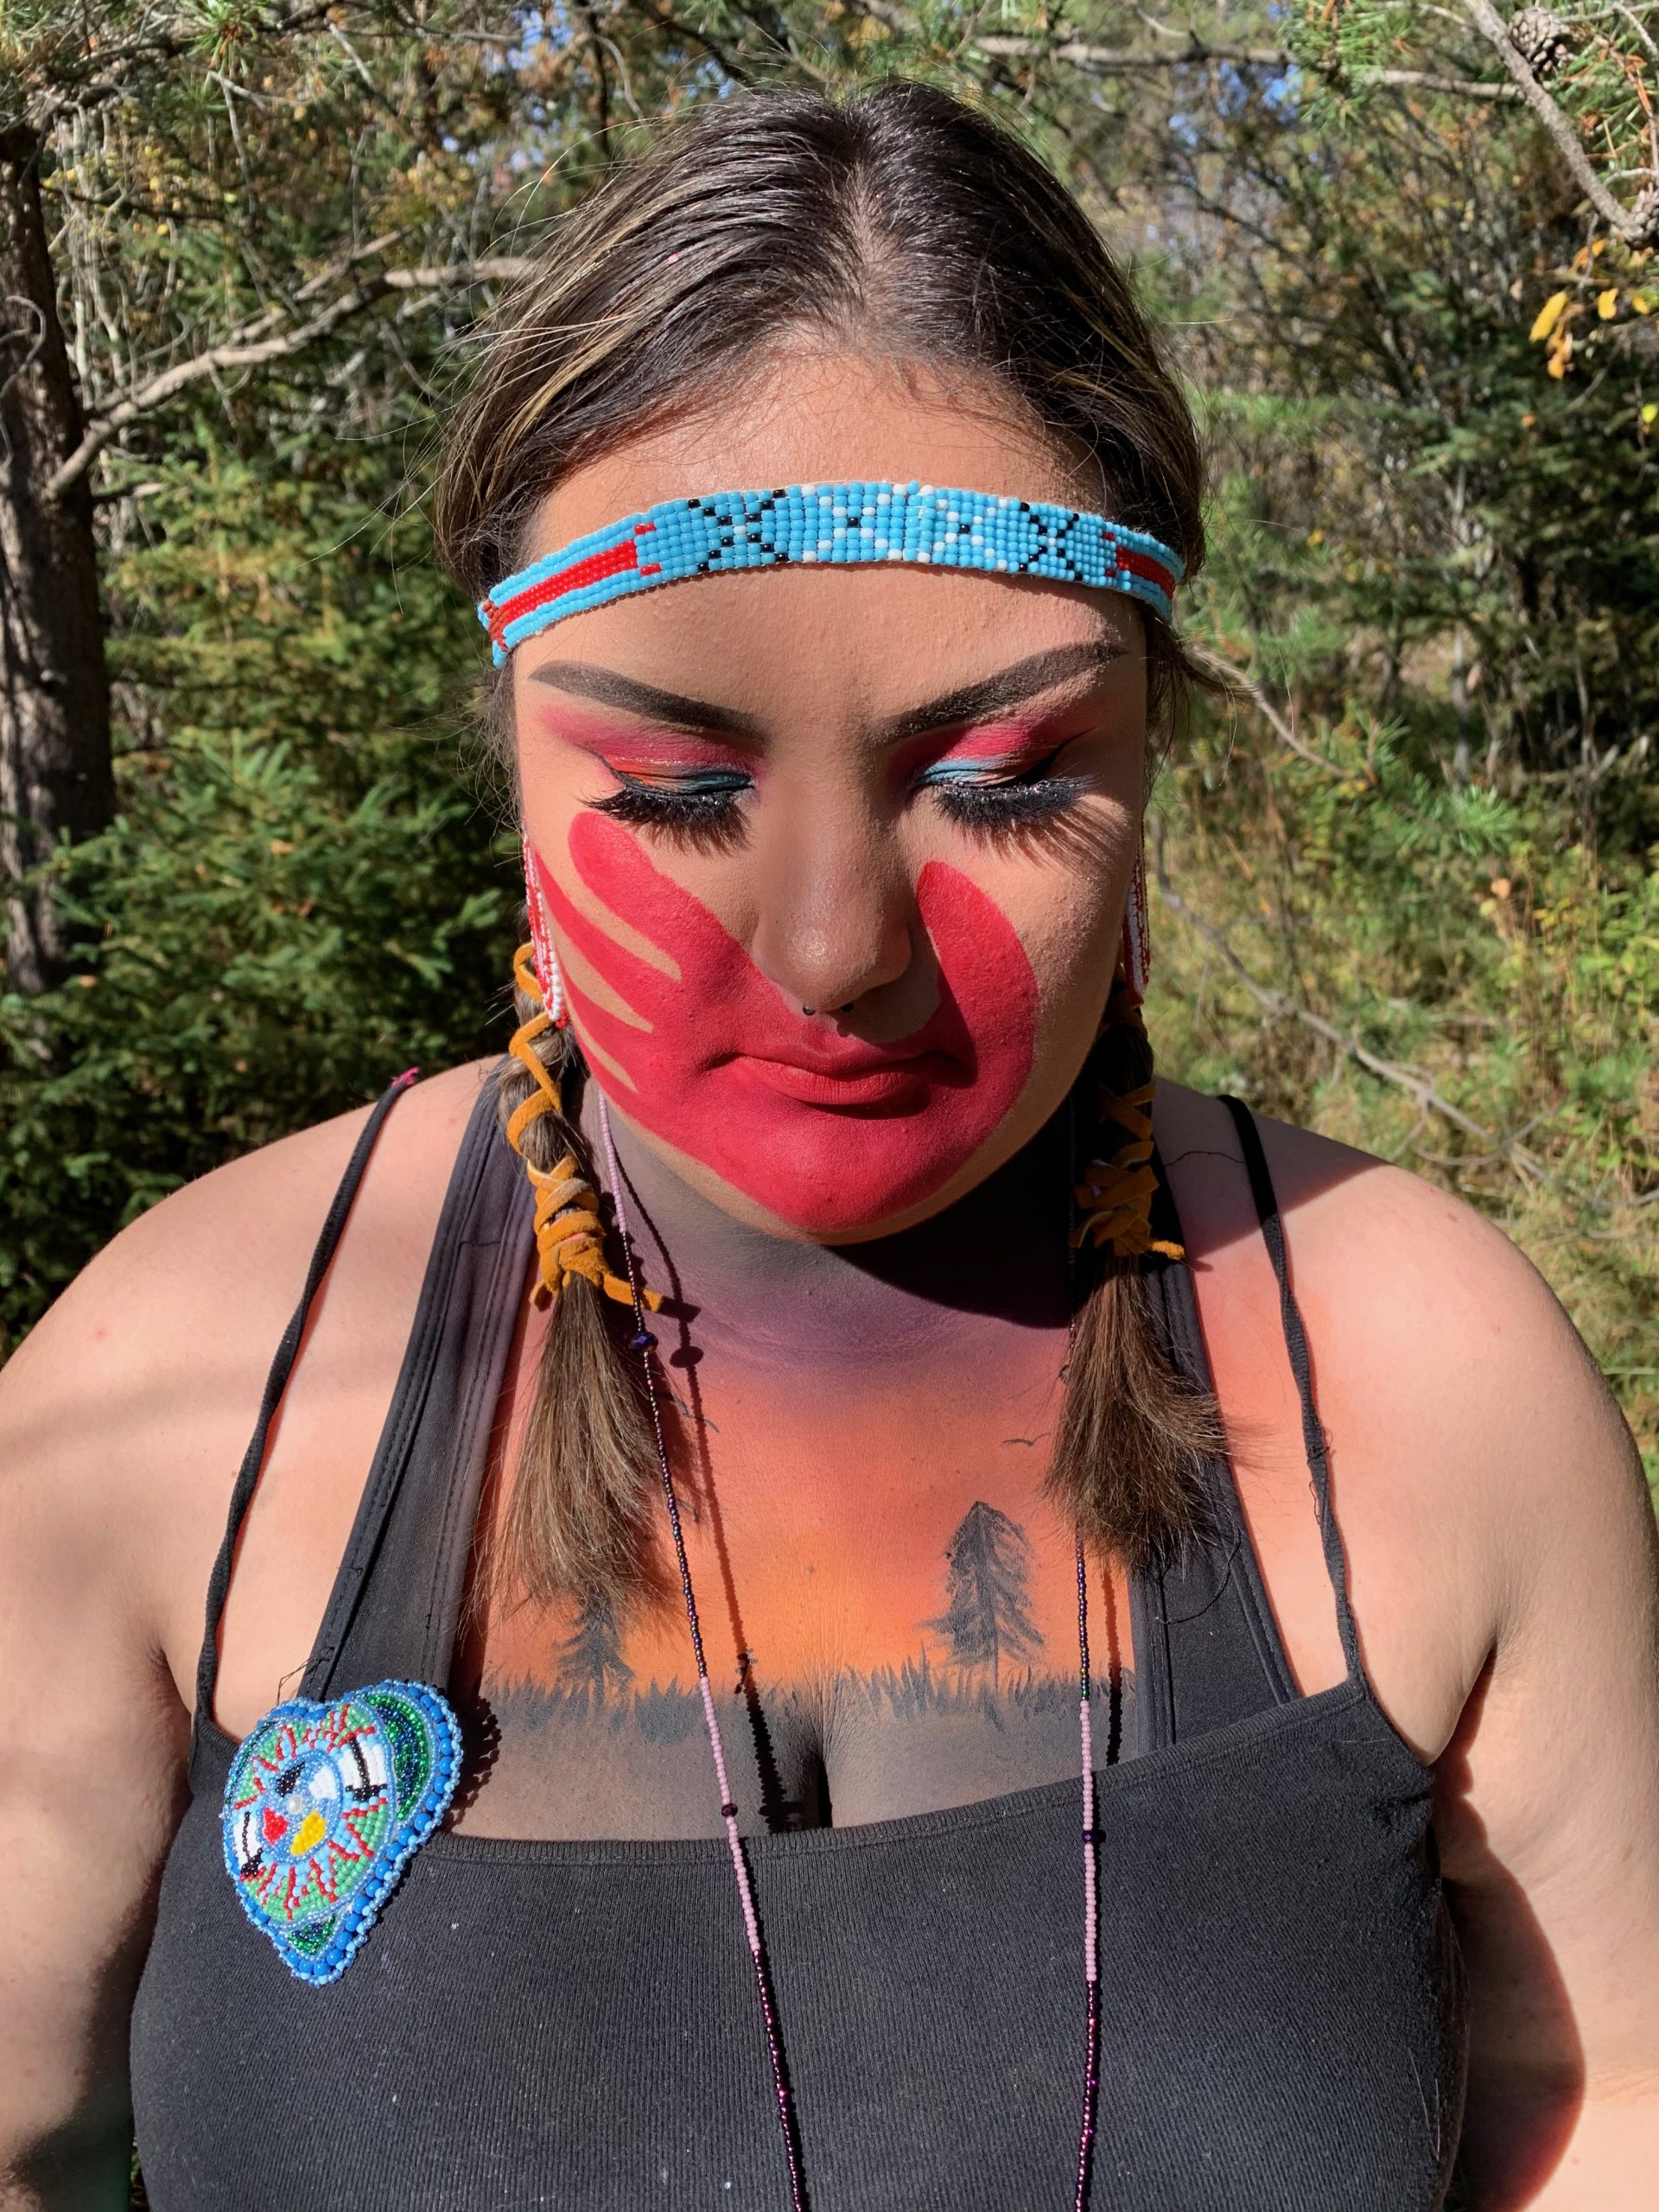 Student wears Indigenous inspired make up